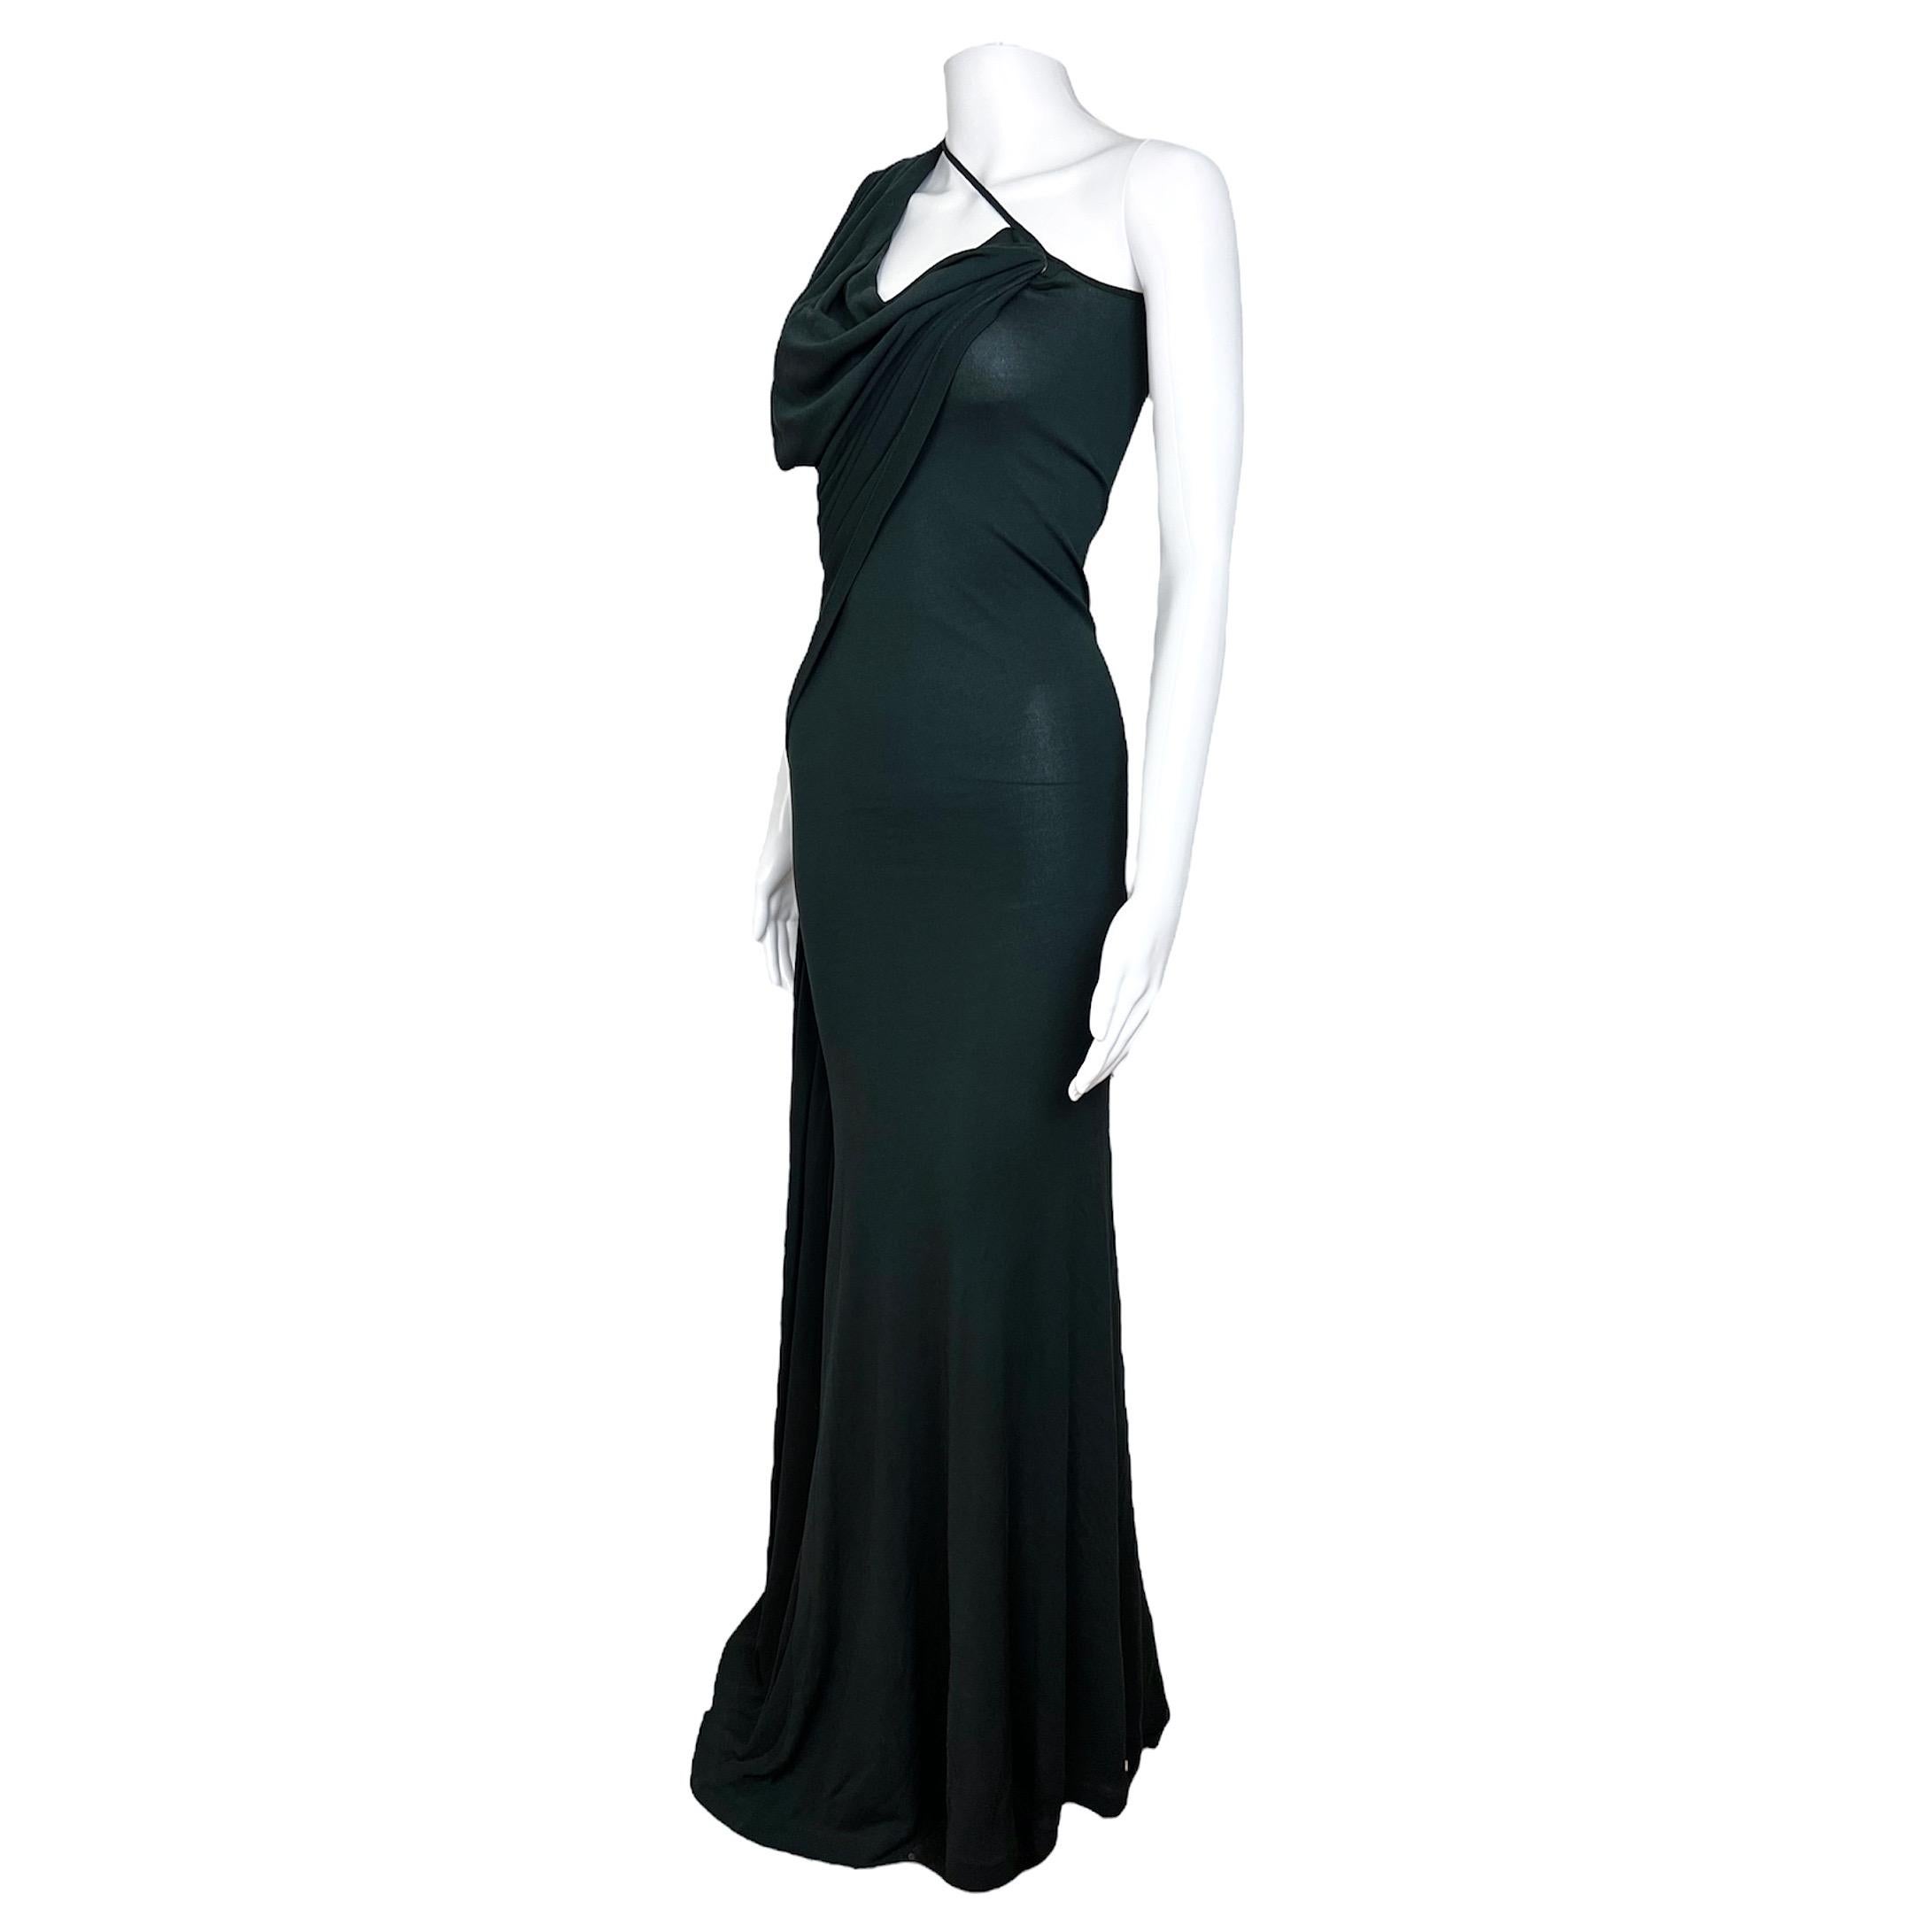 Incredible Vivienne Westwood black one shoulder gown with draped details from Spring Summer 1997 collection in the style of the dresses shown on the runway that season. Size is XS/S.

Condition: Excellent / Flaws: None